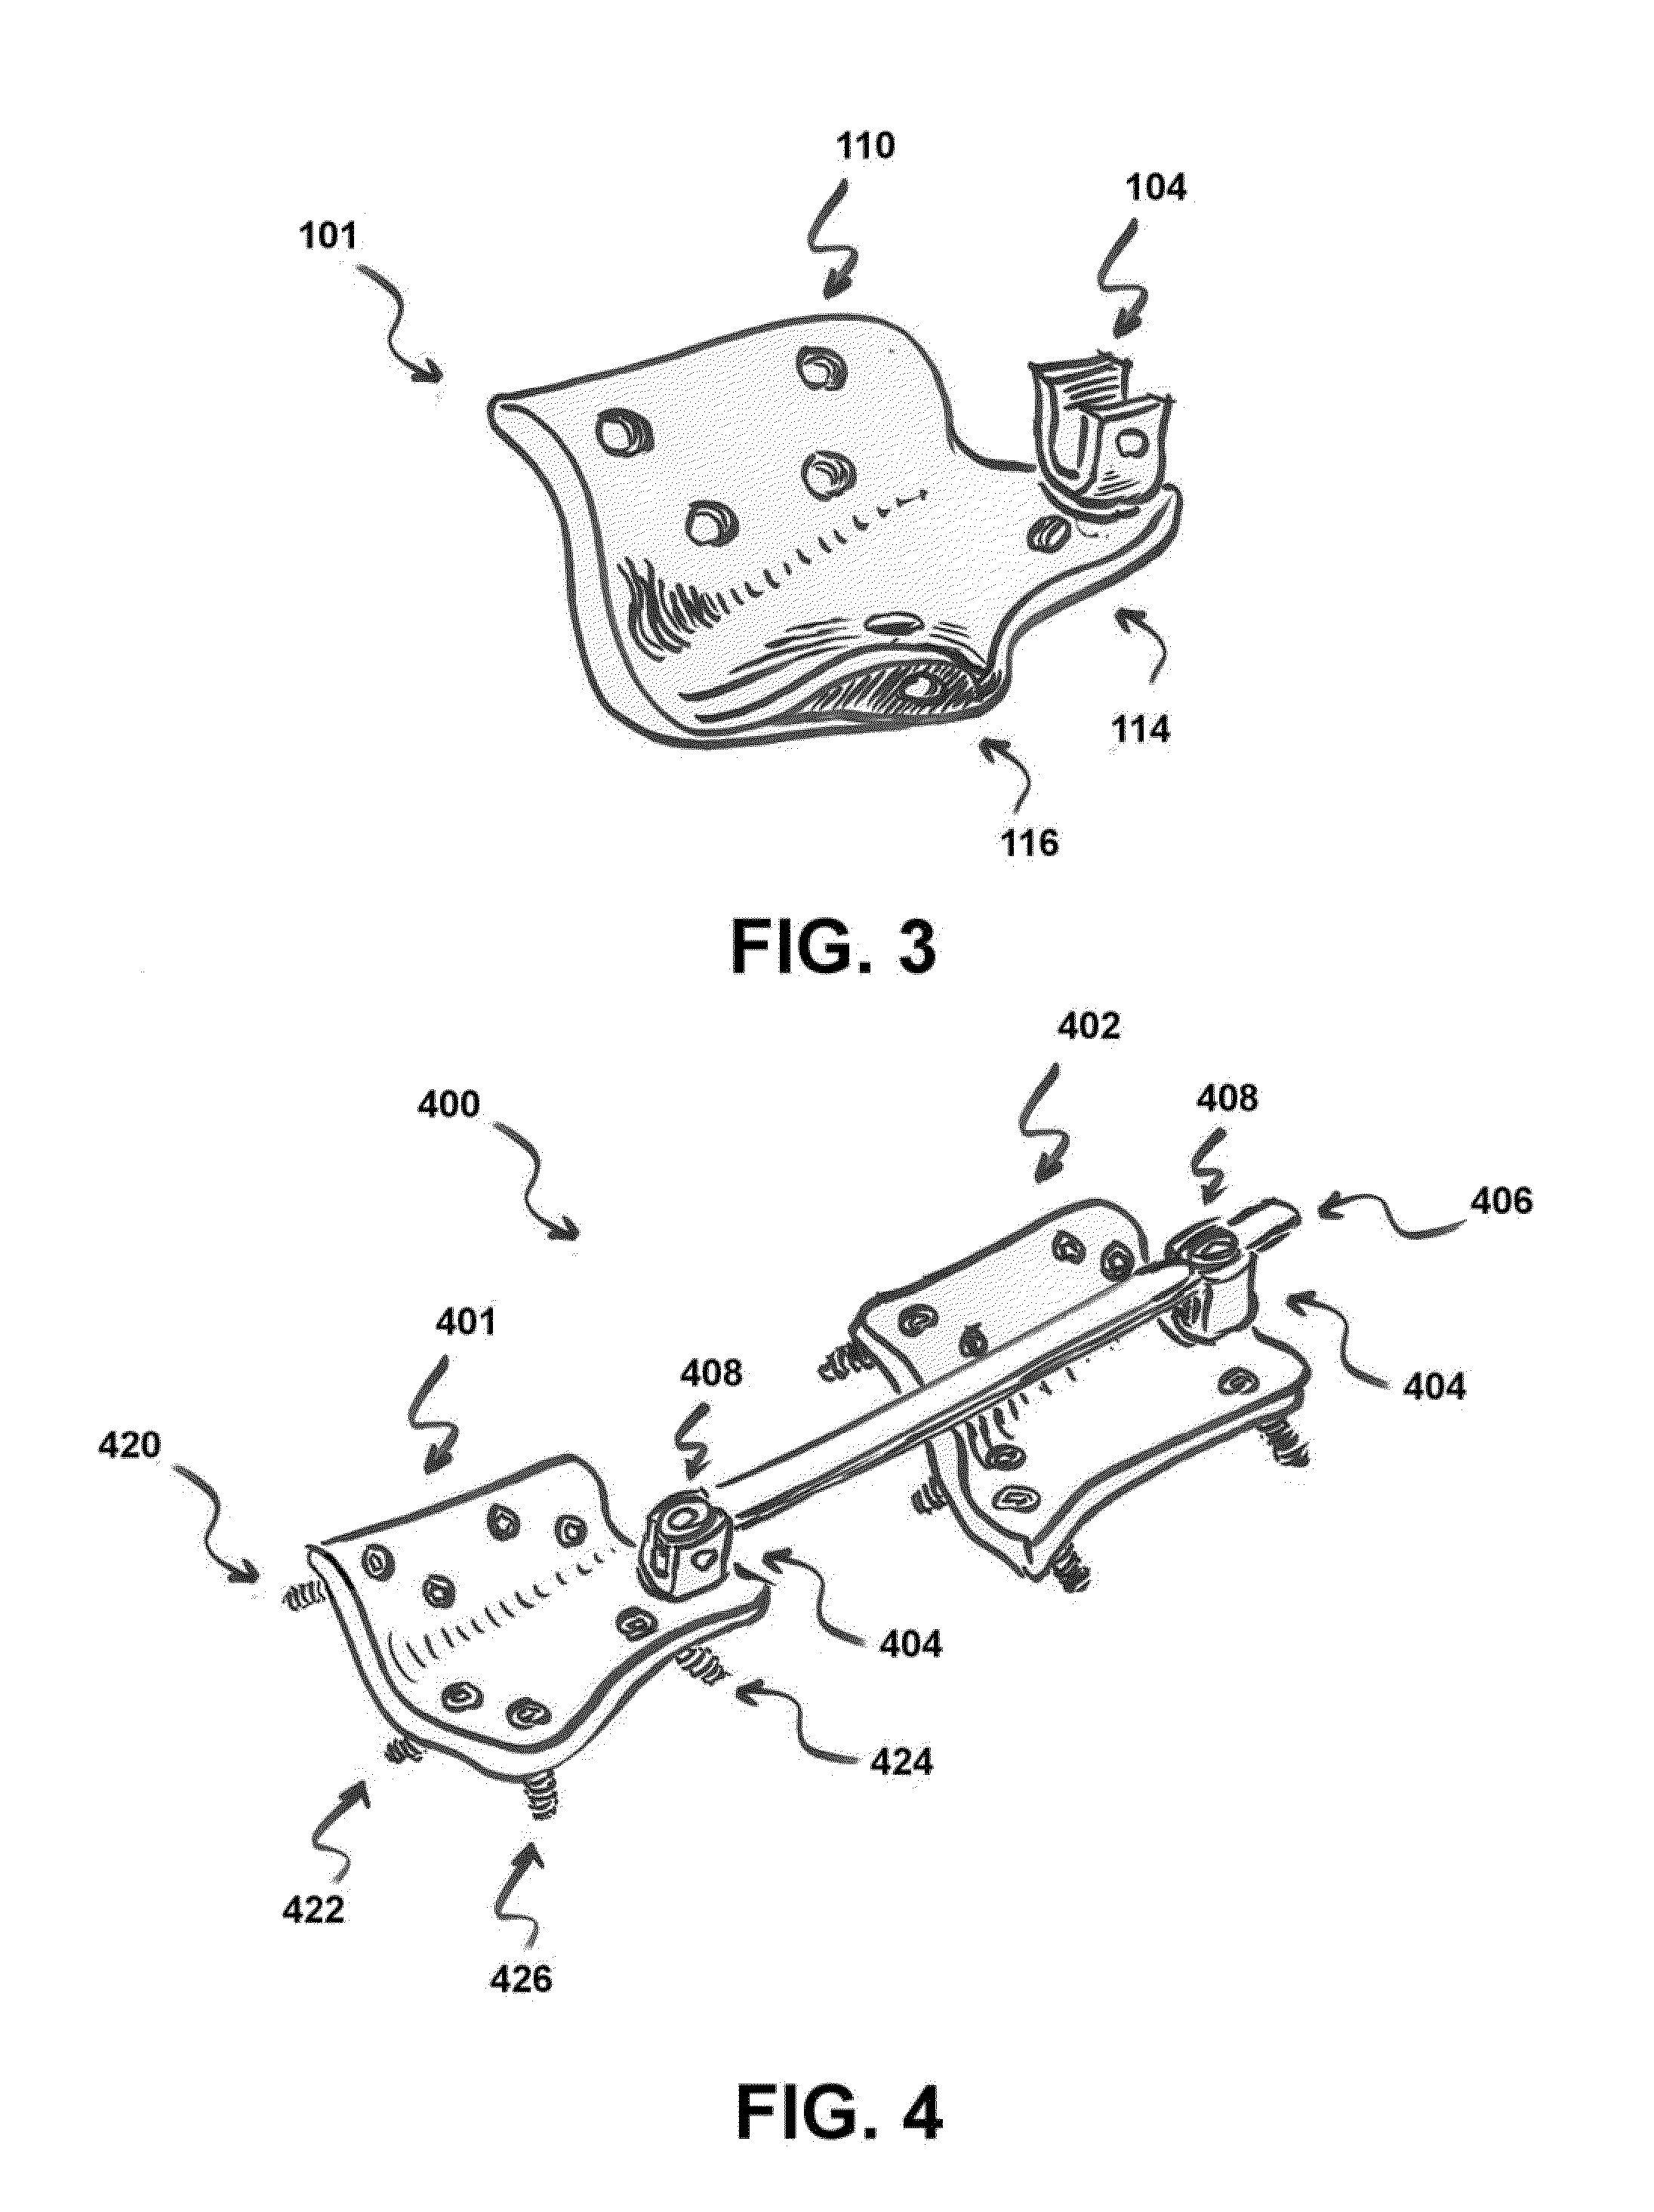 System and method to stablize a spinal column including a spinolaminar locking plate